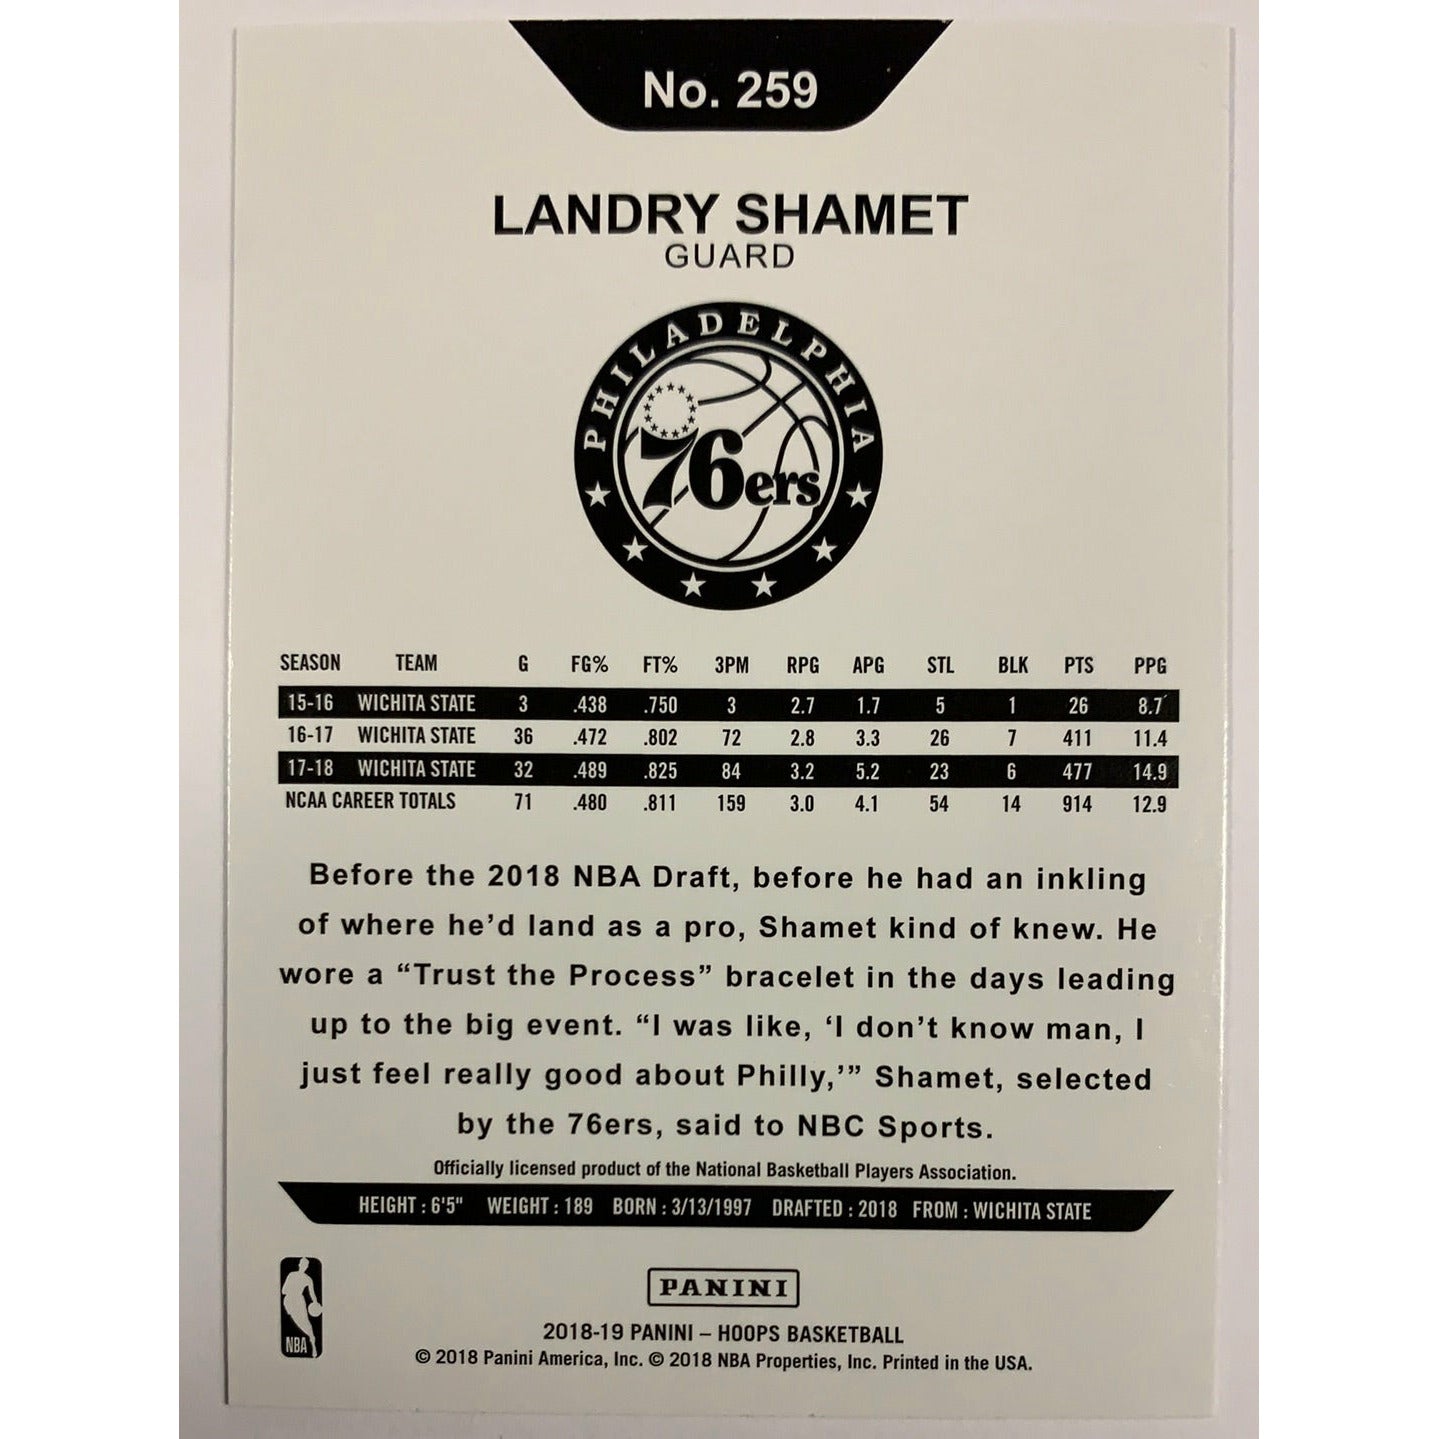  2018-19 Hoops Landry Shamet RC  Local Legends Cards & Collectibles